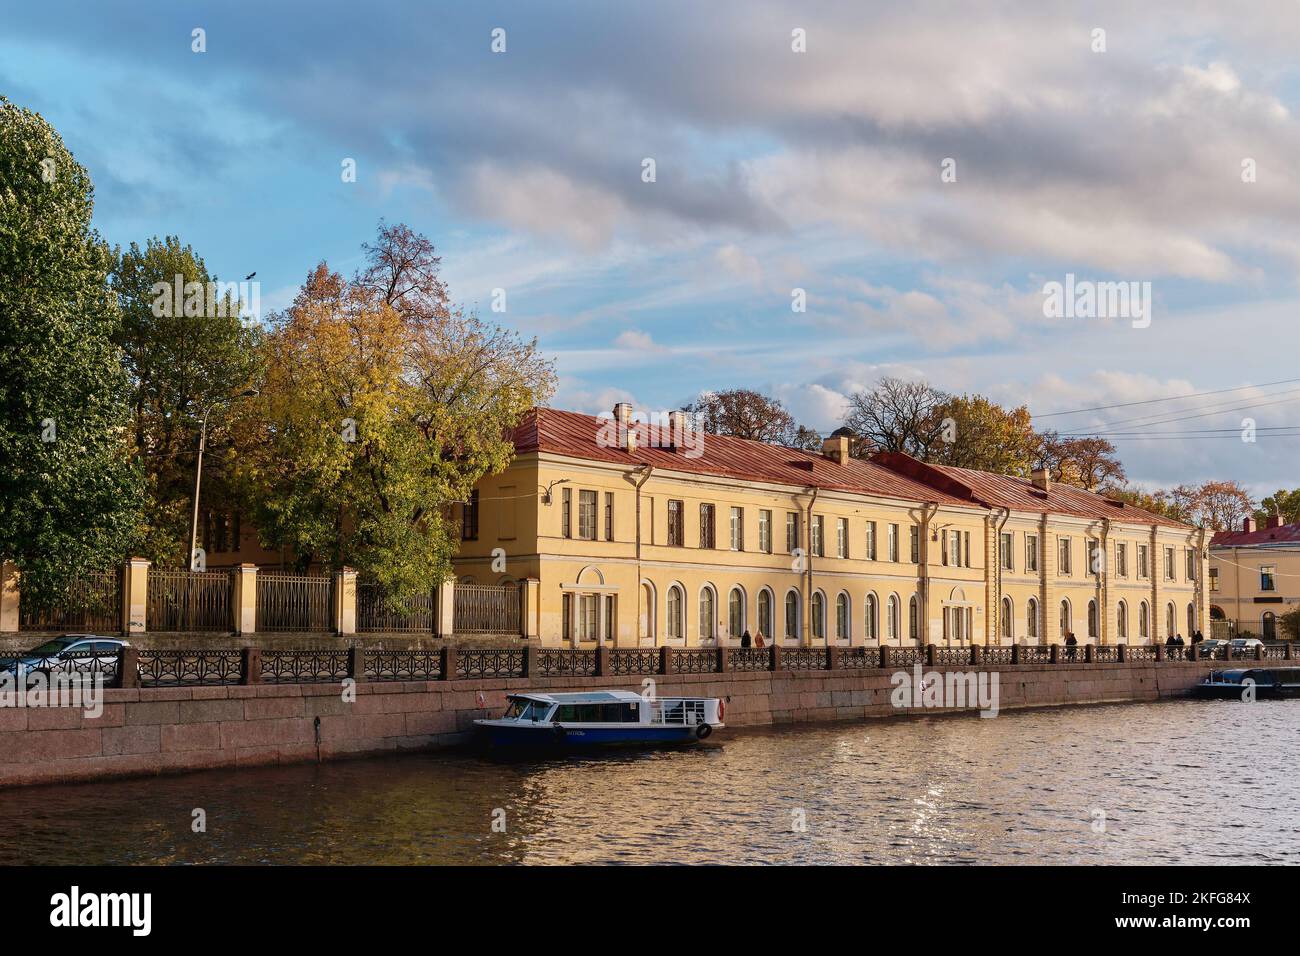 Evening view of one of the buildings of the Herzen Pedagogical University on the Moika River Embankment, landmark: St. Petersburg, Russia - October 07 Stock Photo